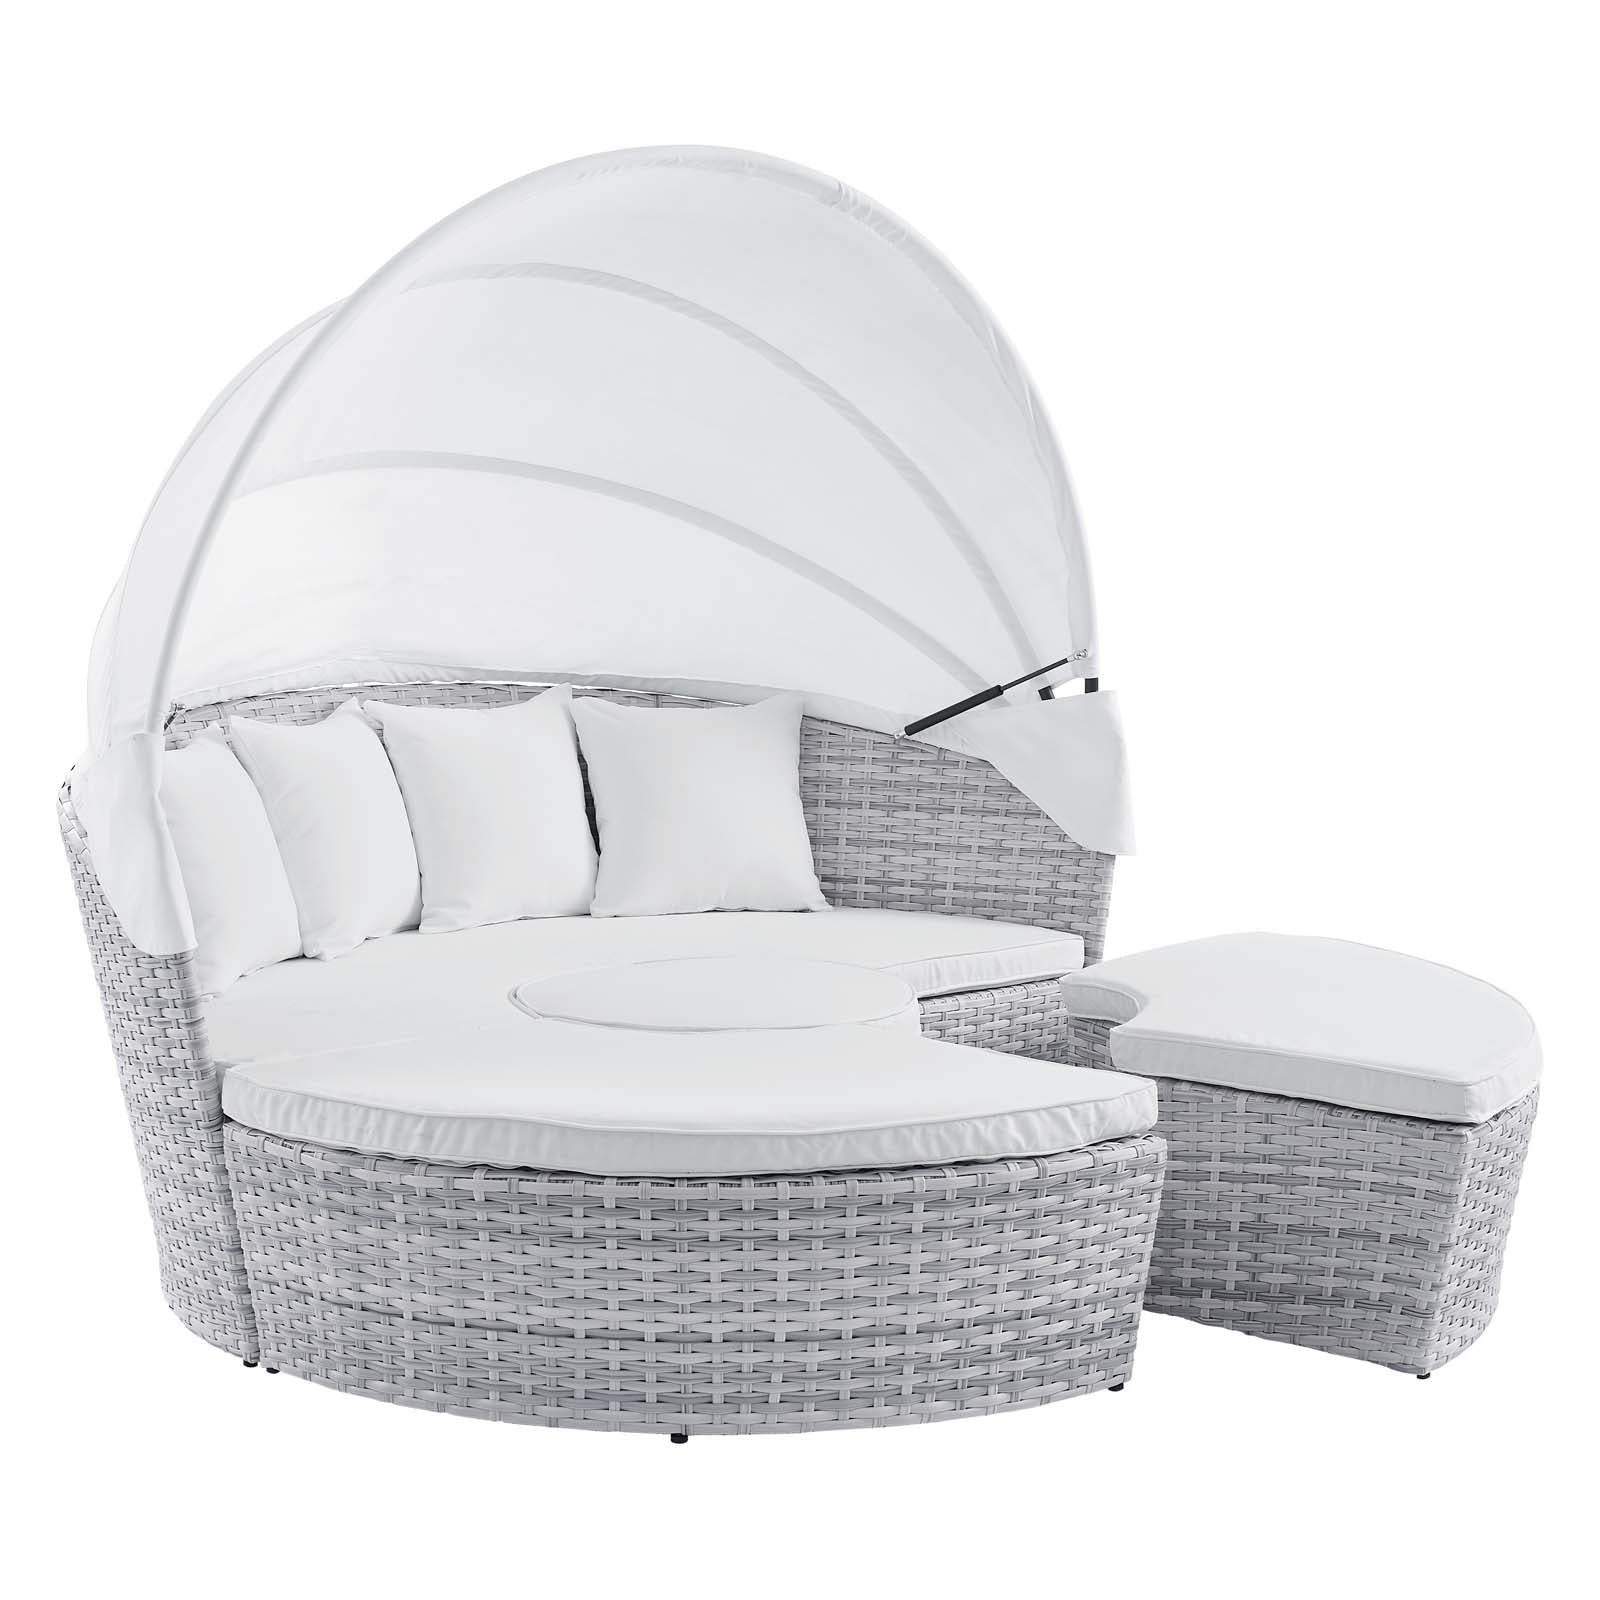 Modway Patio Daybeds - Scottsdale Canopy Sunbrella Outdoor Patio Daybed Light Gray White